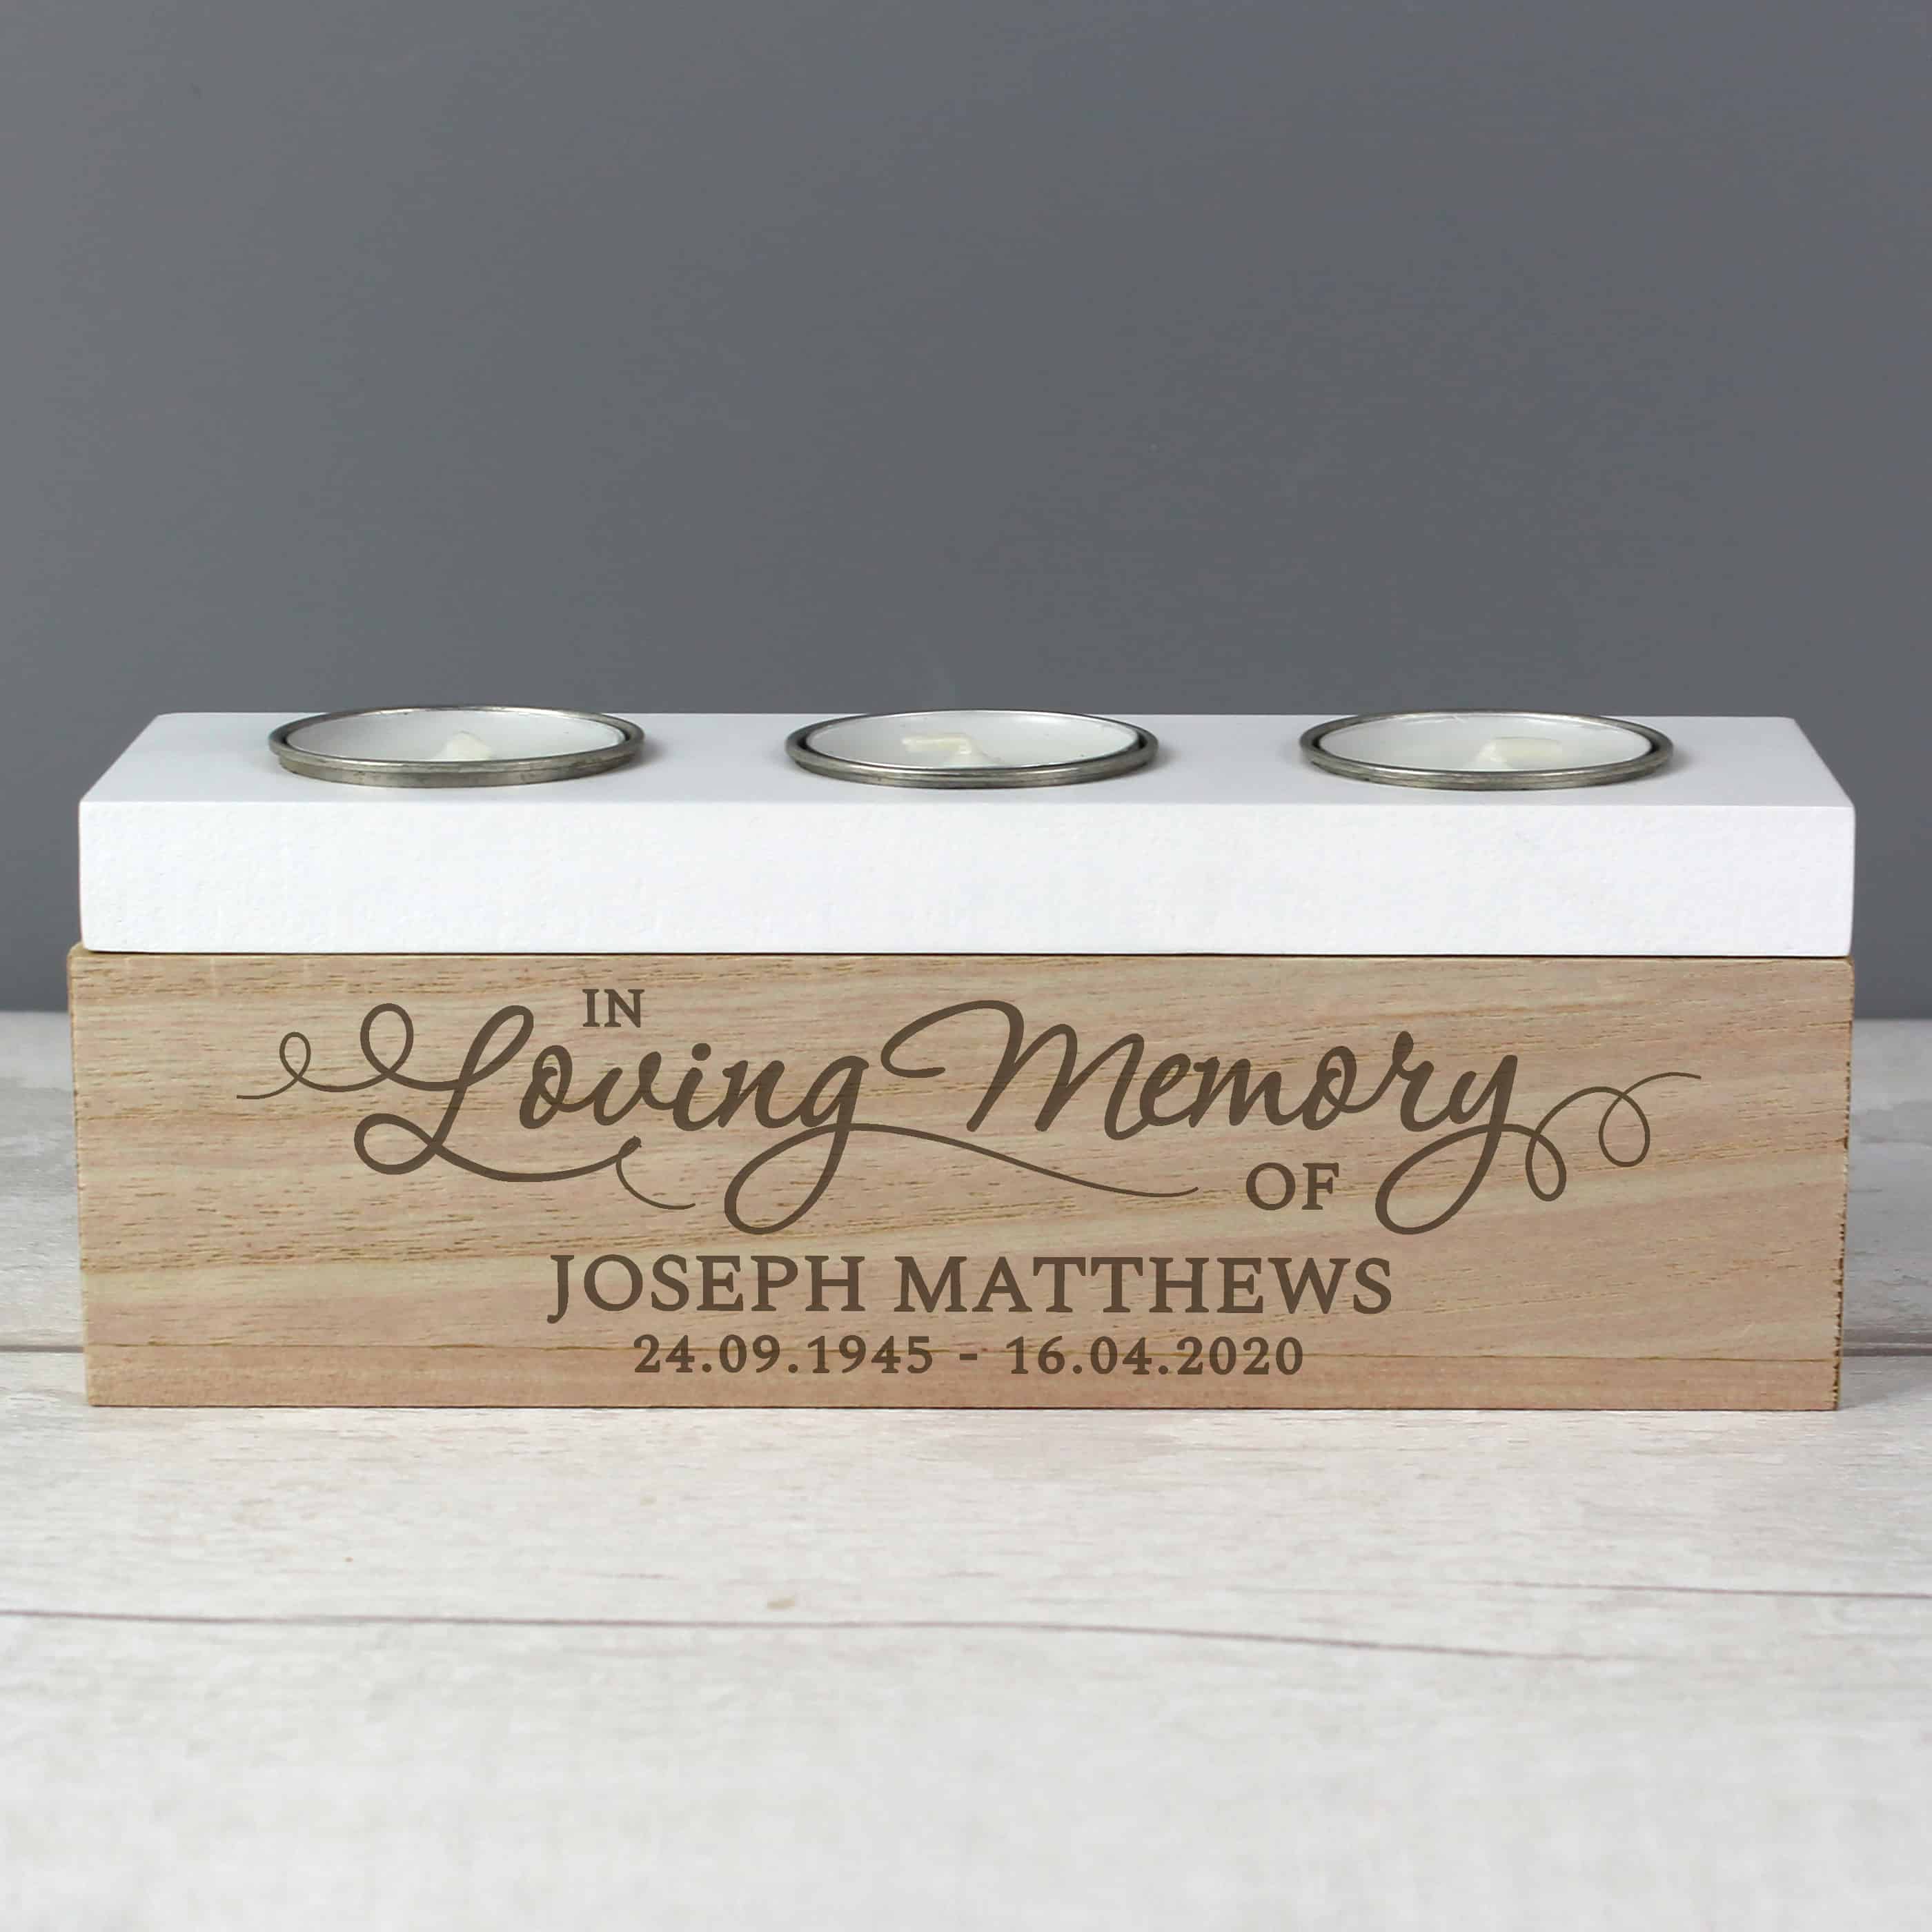 Memory Tealight holder. A wooden tealight box that can be personalised with any message over 2 lines. The lid on the box can hold 3 tealights. A lovely gift to remember someone who is no longer with you.